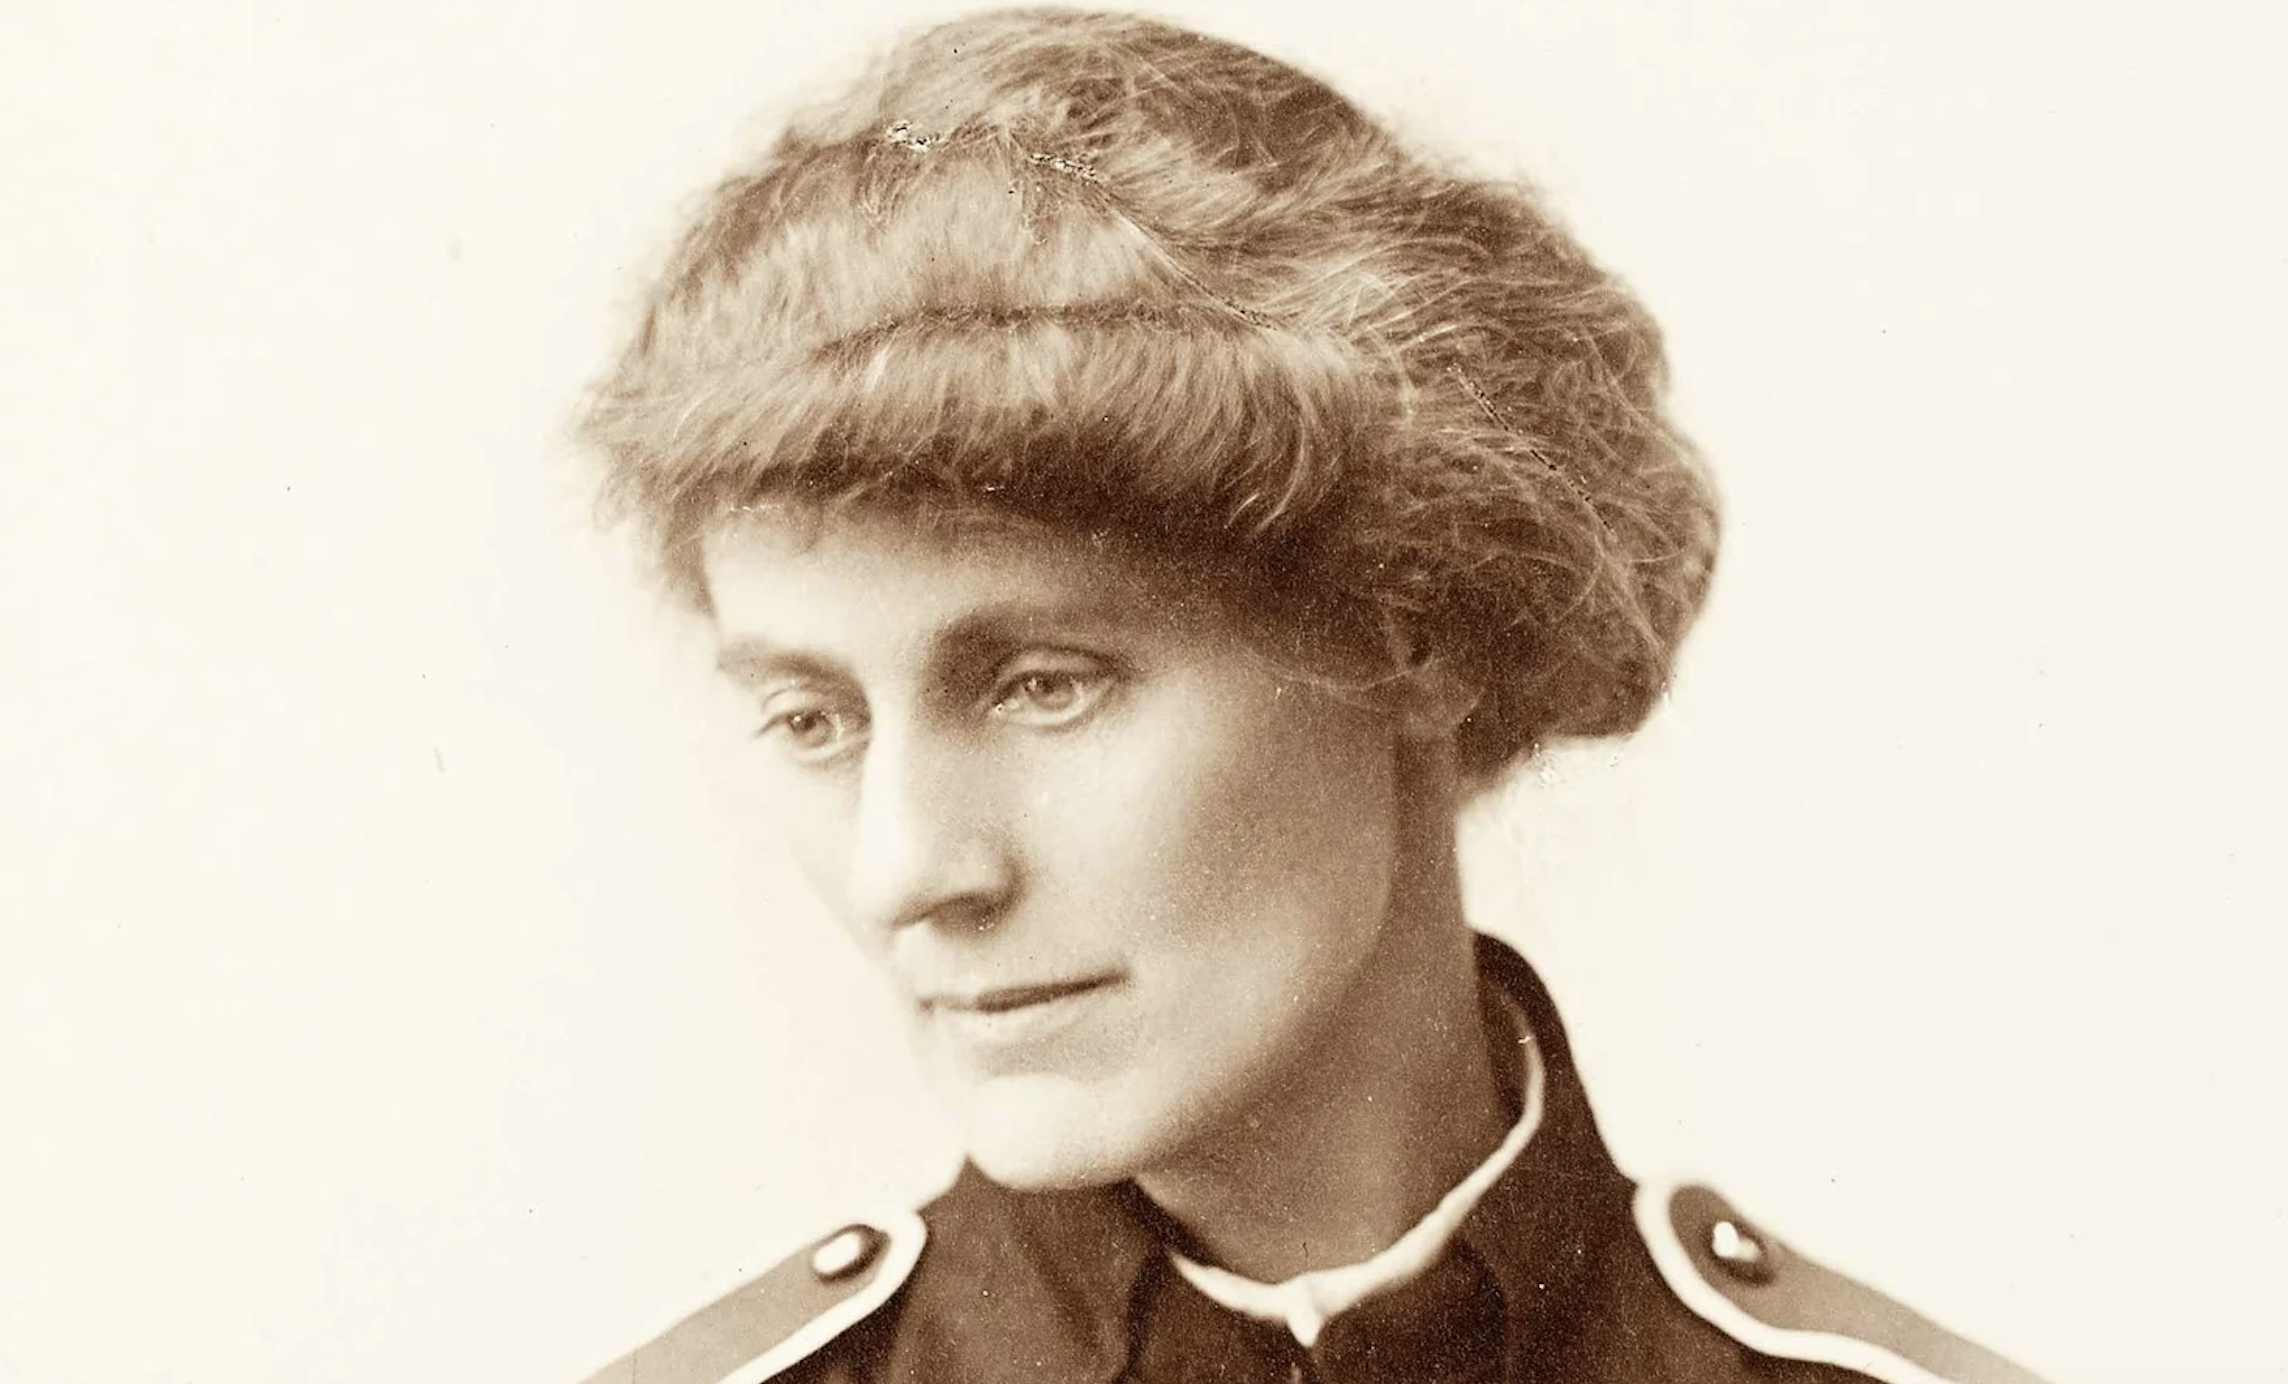 €25k Markievicz Award Opens for Applications on 7 May